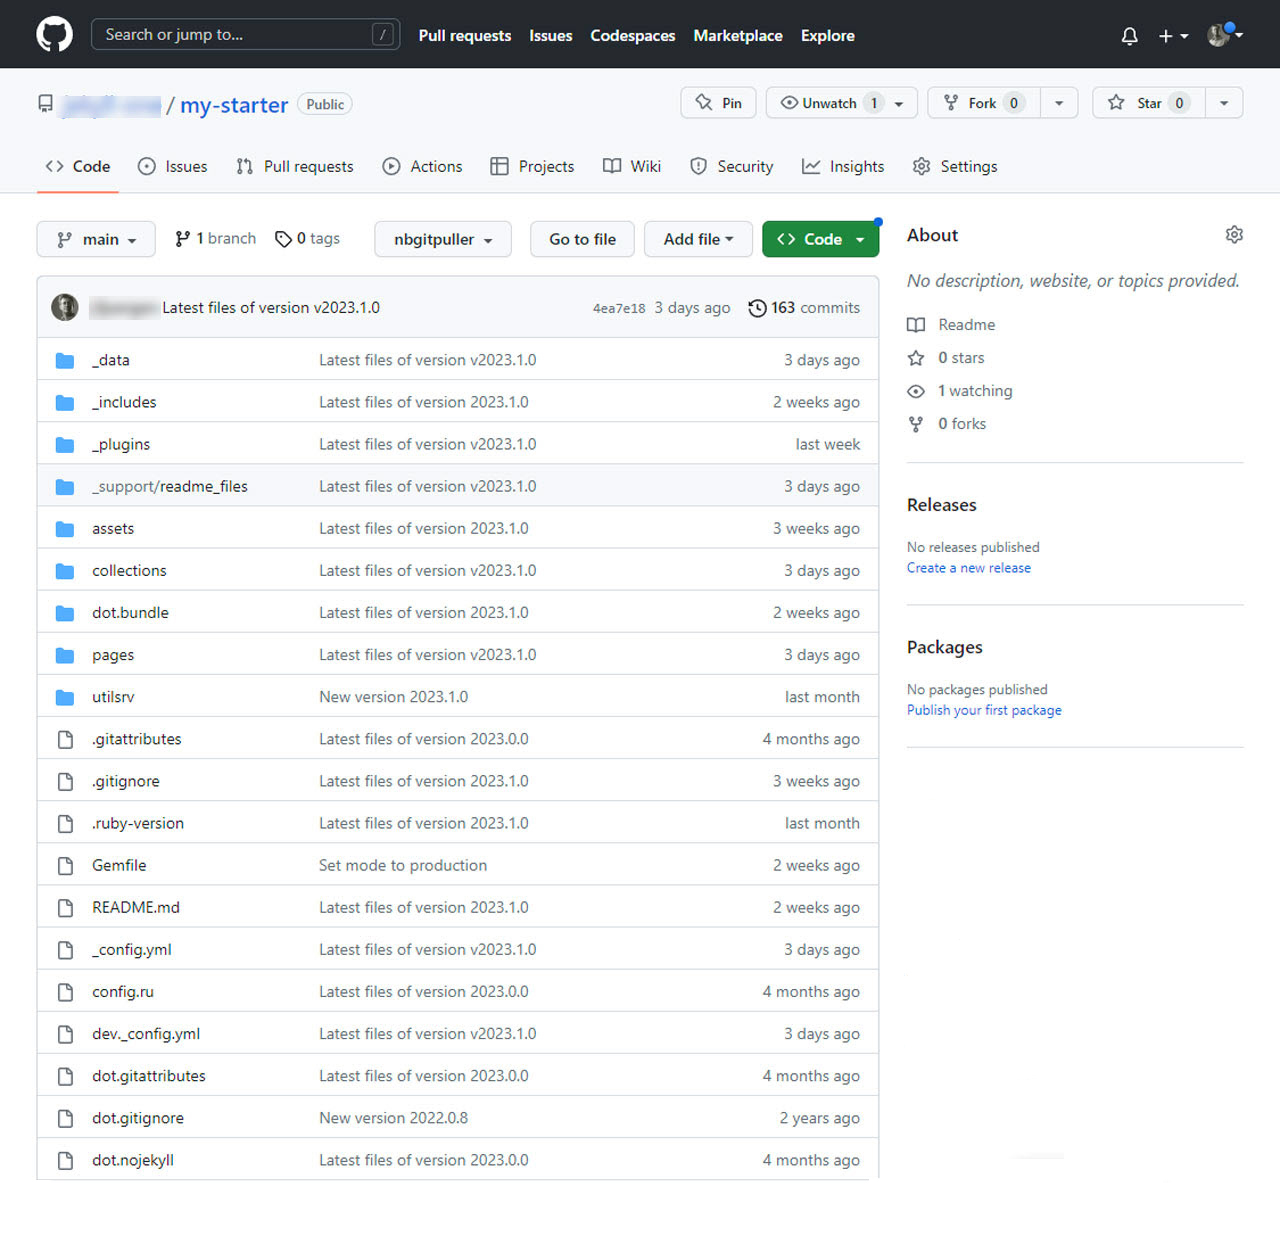 Repository details at Github